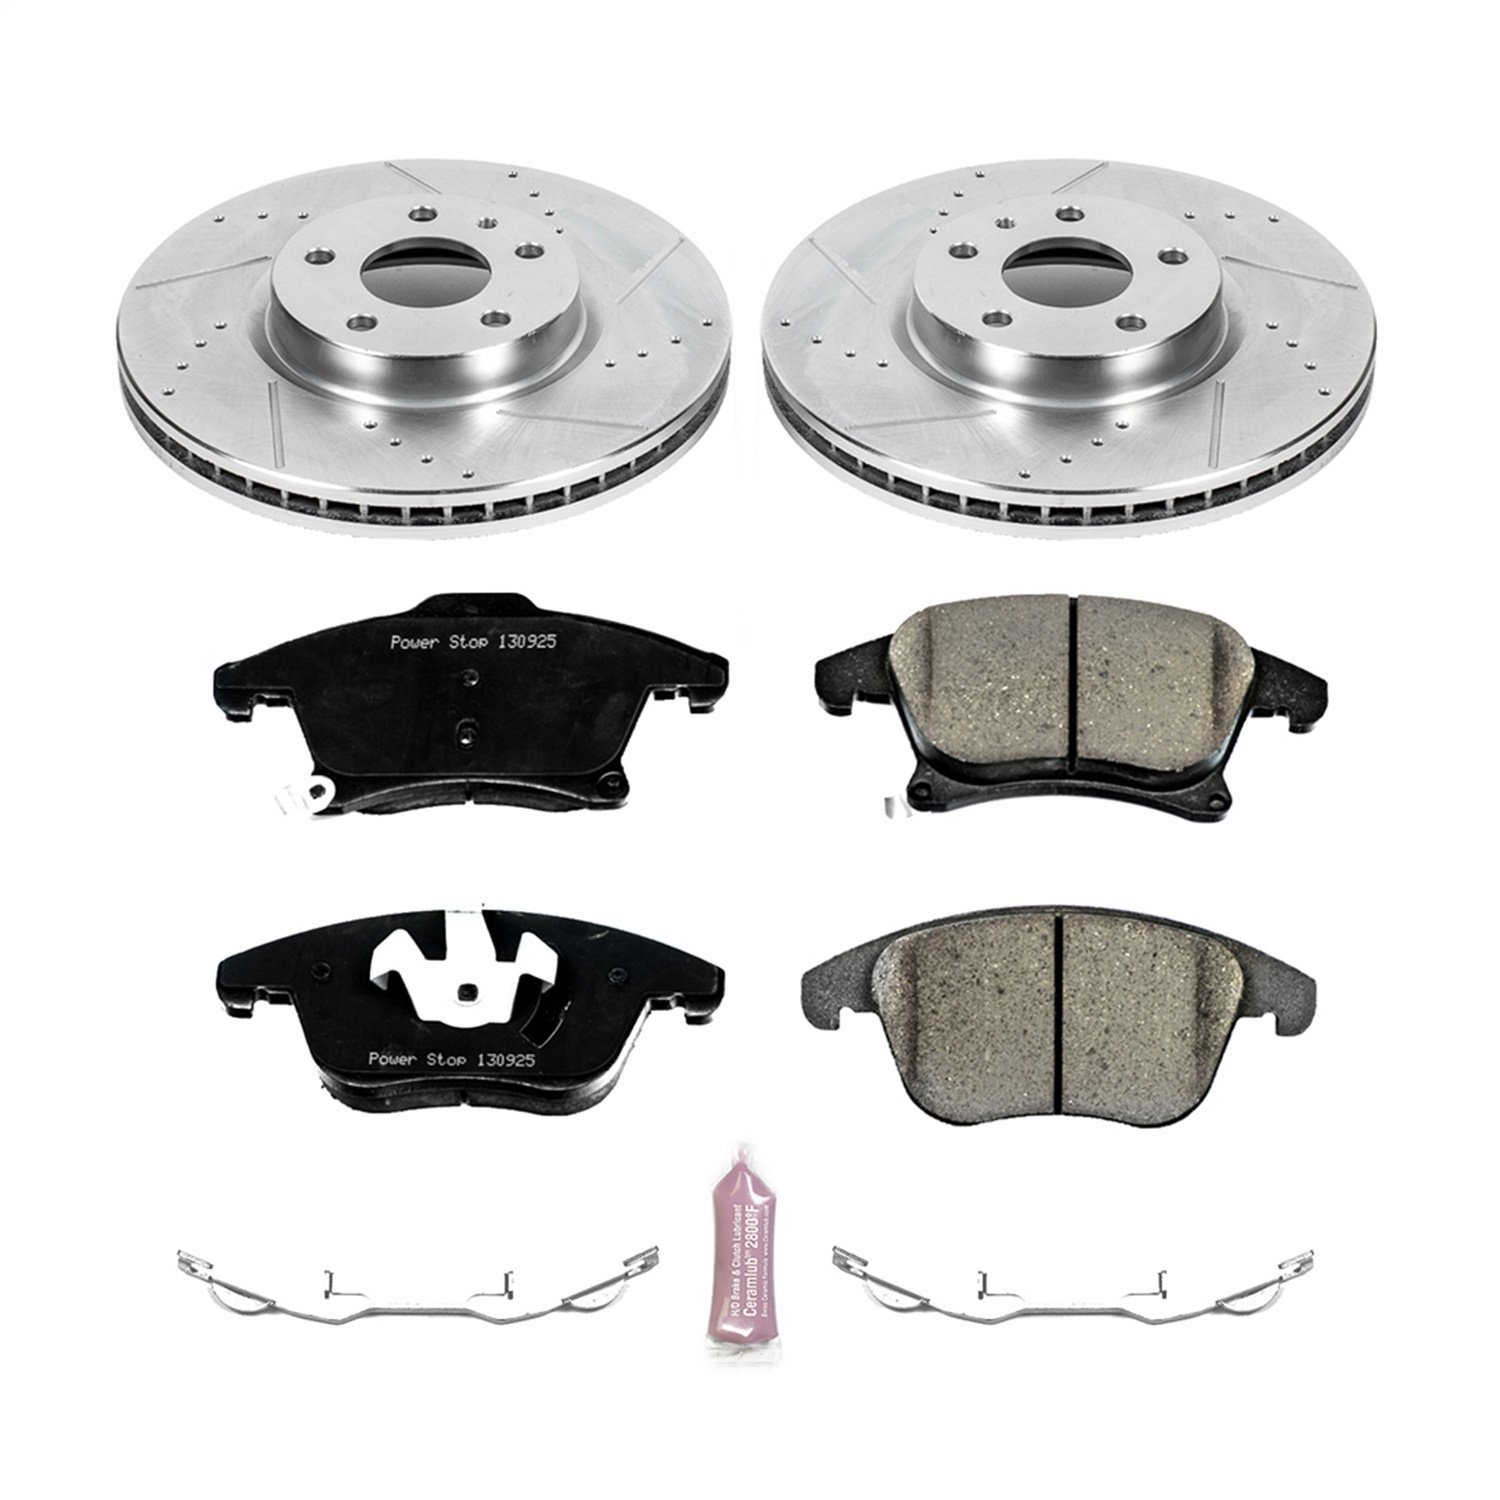 Z23 Evolution Brake Kit for Ford Fusion and Lincoln MKZ